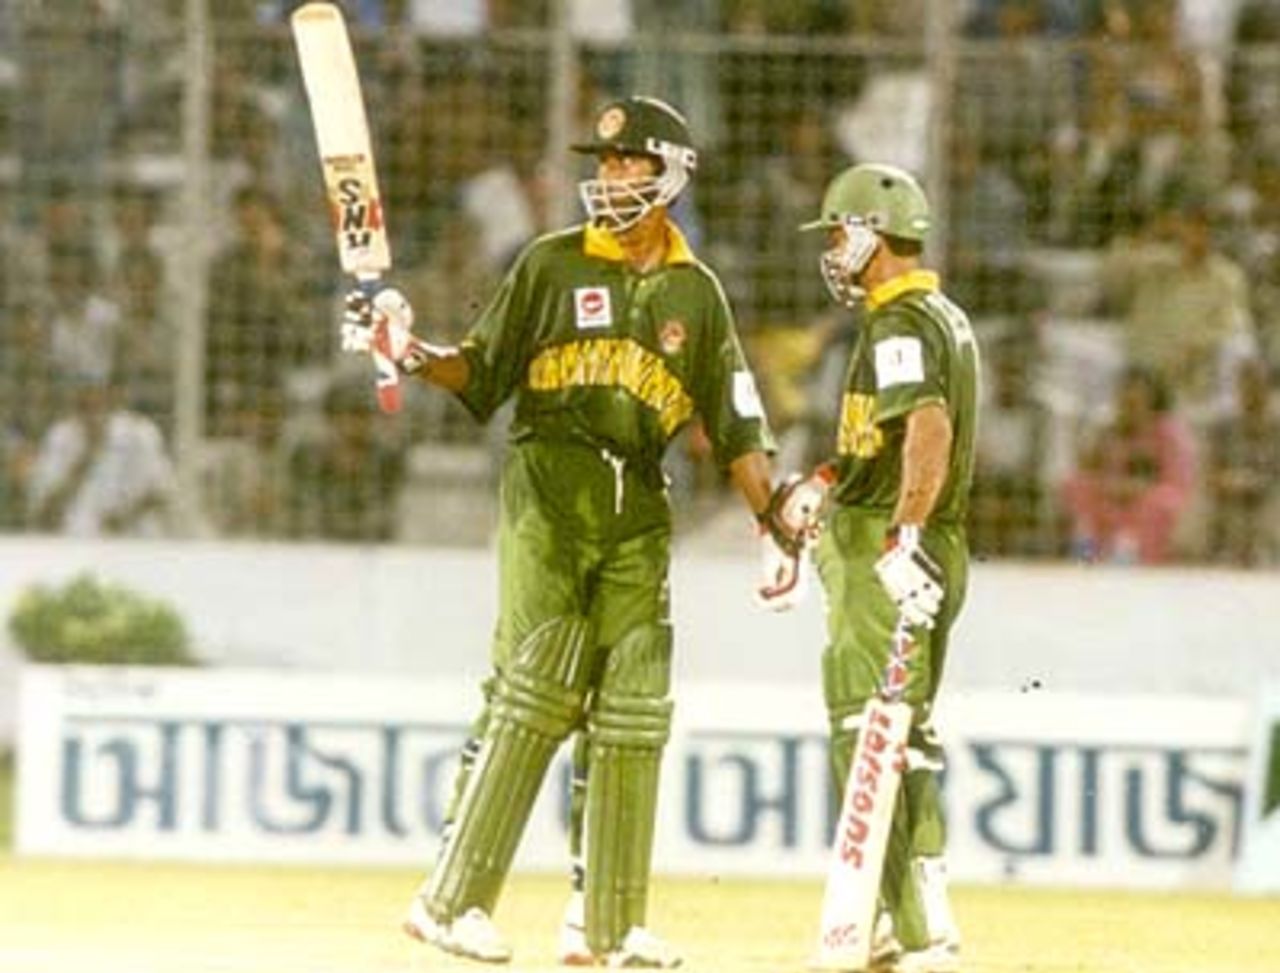 Al Shahriar Rokon acknowledges the crowd's cheers on reaching his fifty in the first ODI against West Indies, West Indies v Bangladesh (1st ODI) at Bangabandhu National Stadium, Dhaka 08 October 1999, West Indies in Bangladesh 1999/00